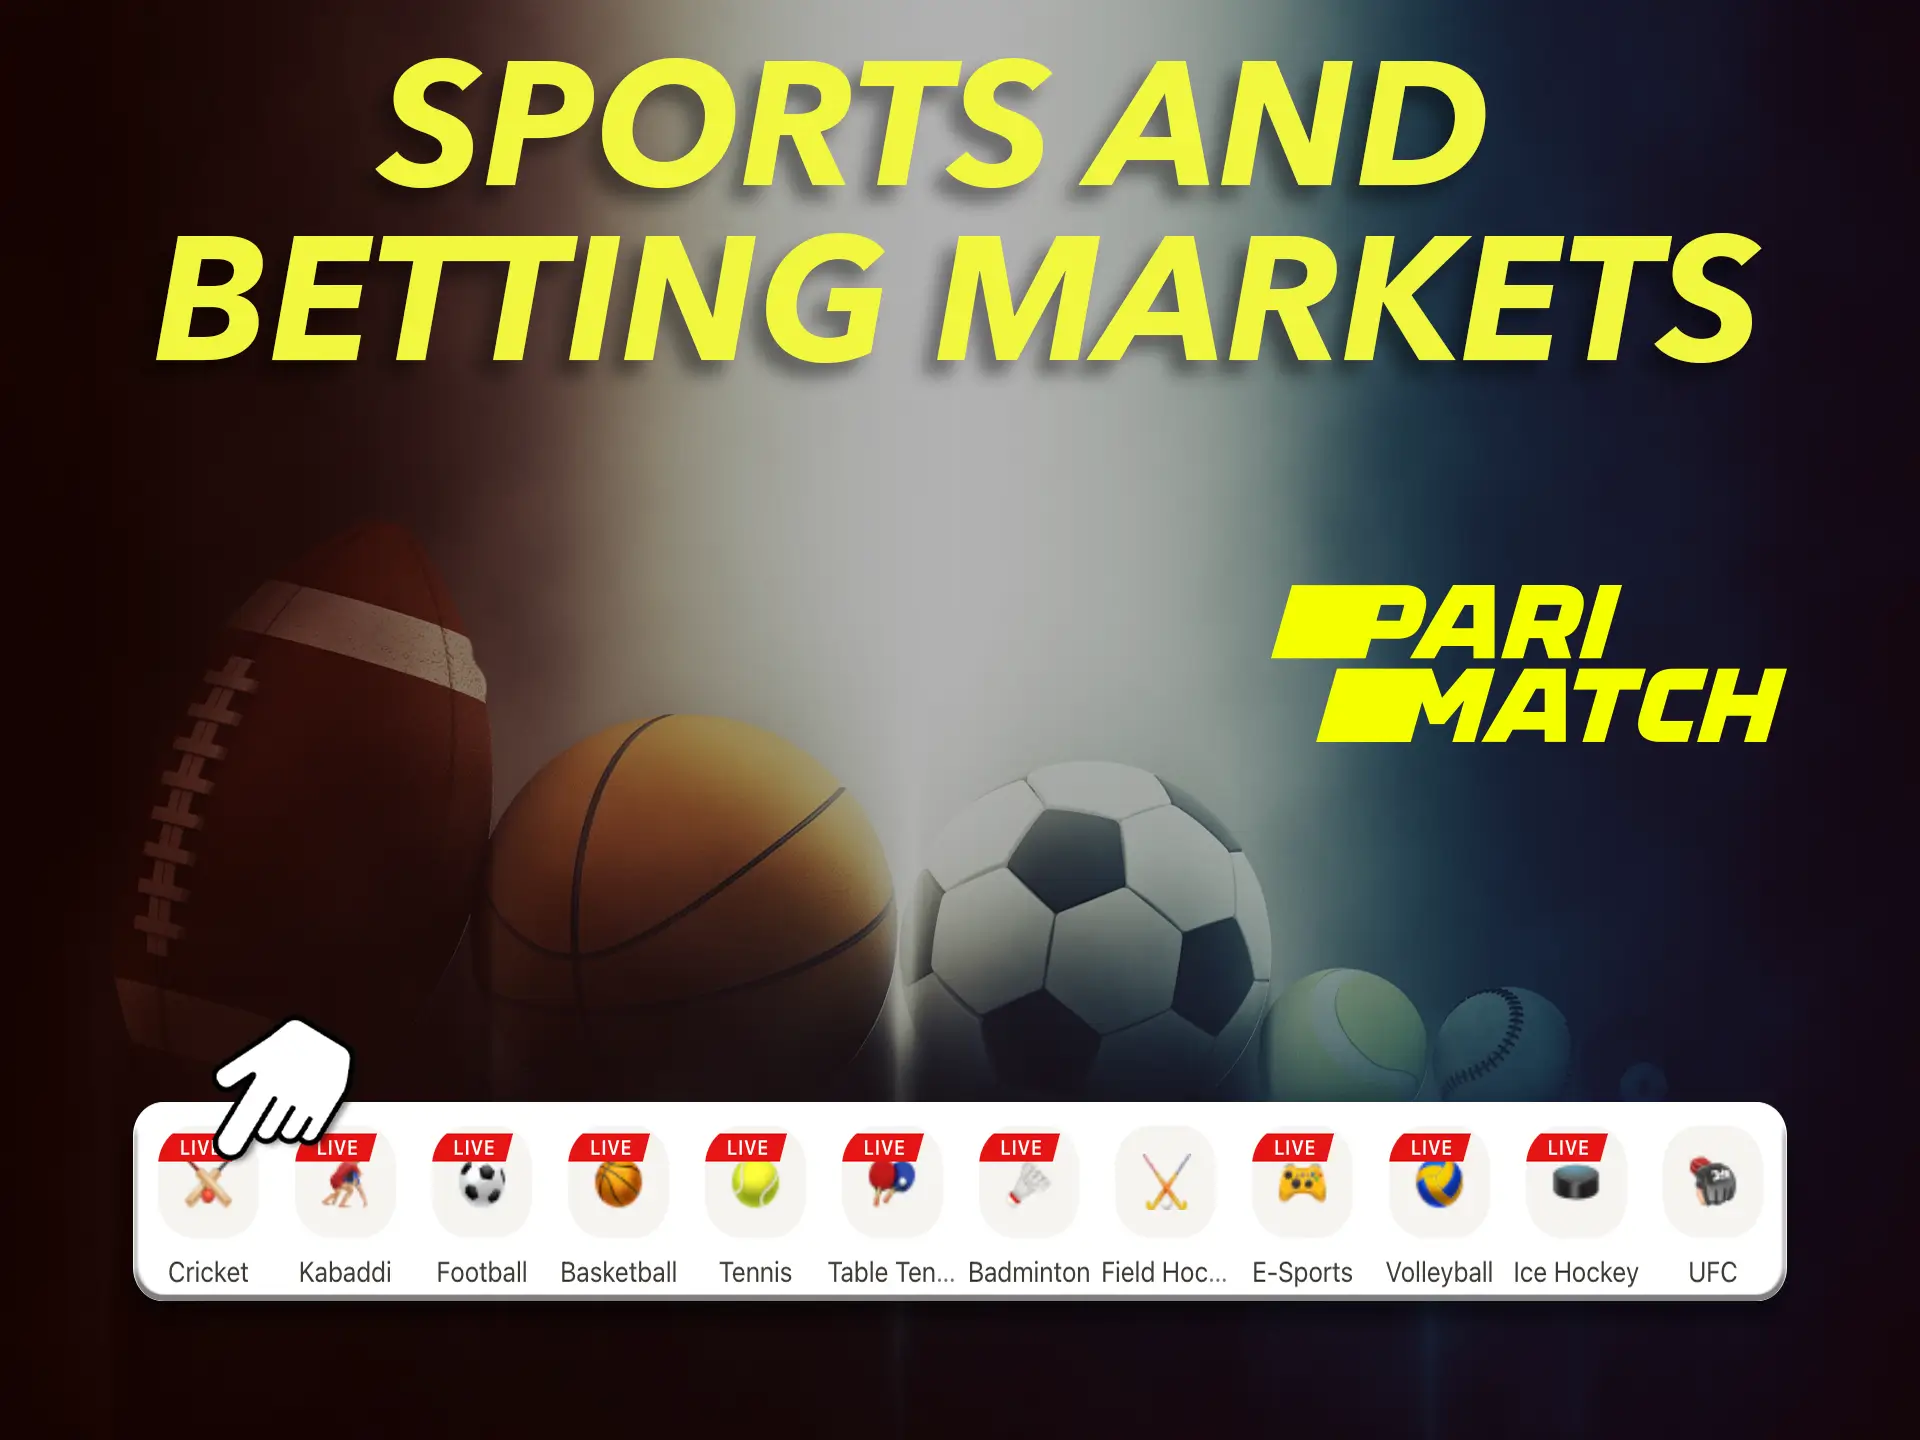 Sports fans in Parimatch are offered a large number of disciplines and bets to them.